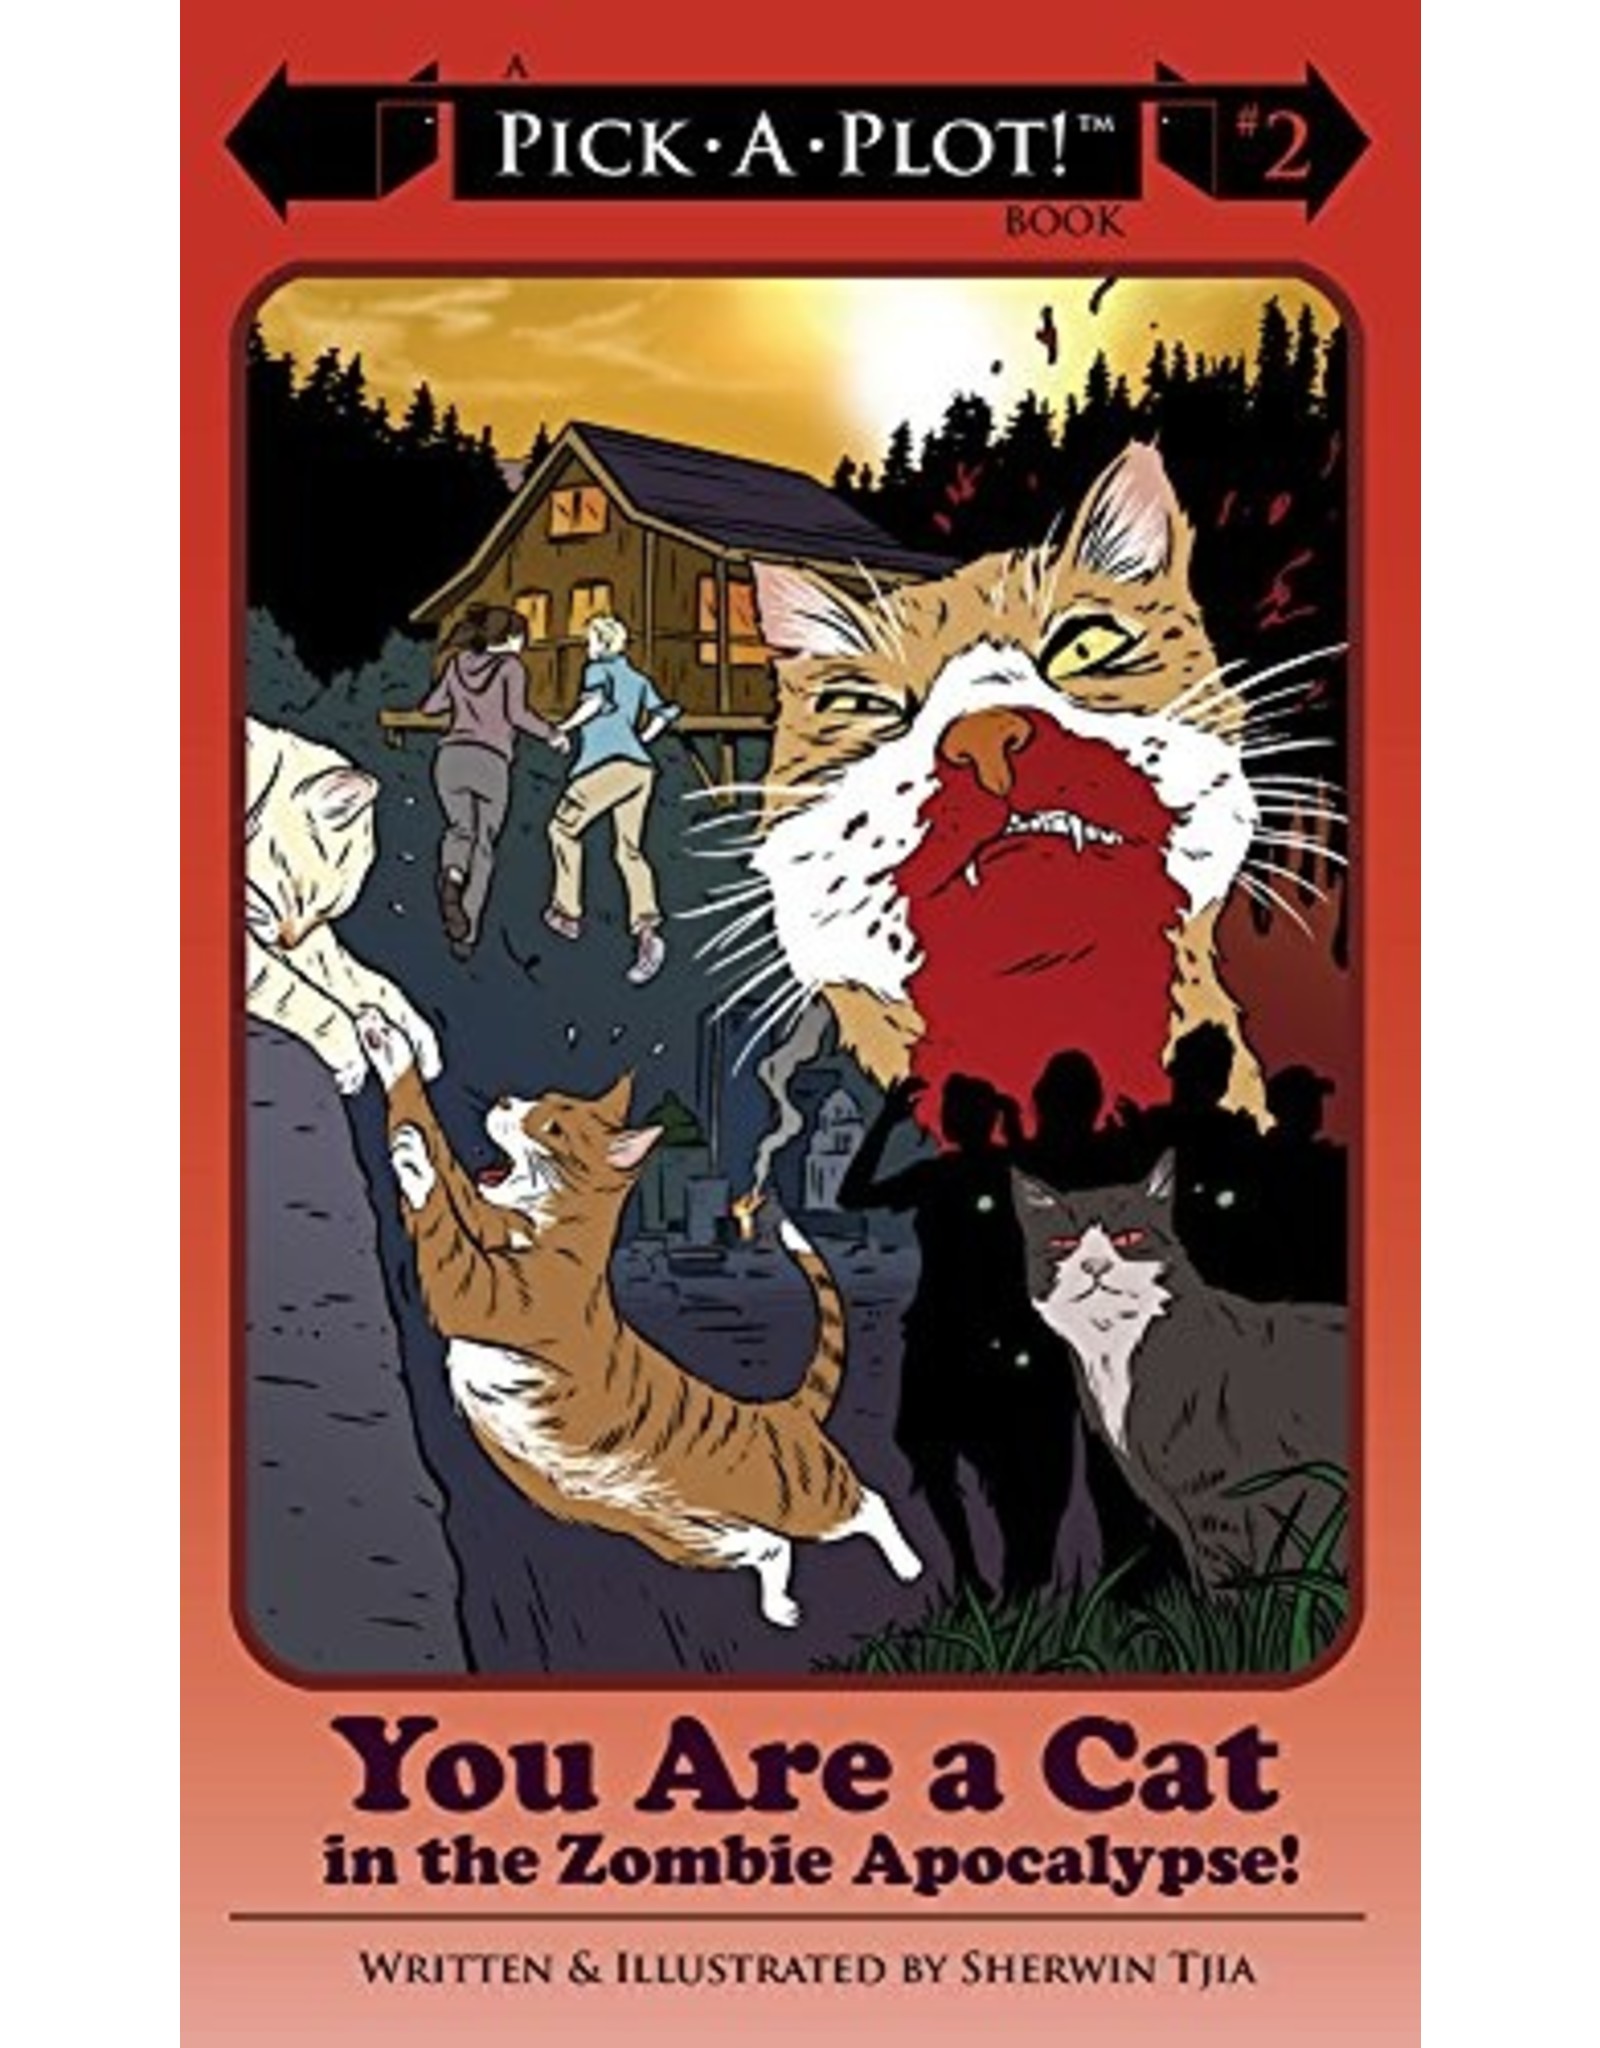 Literature You Are a Cat! in the Zombie Apocalypse